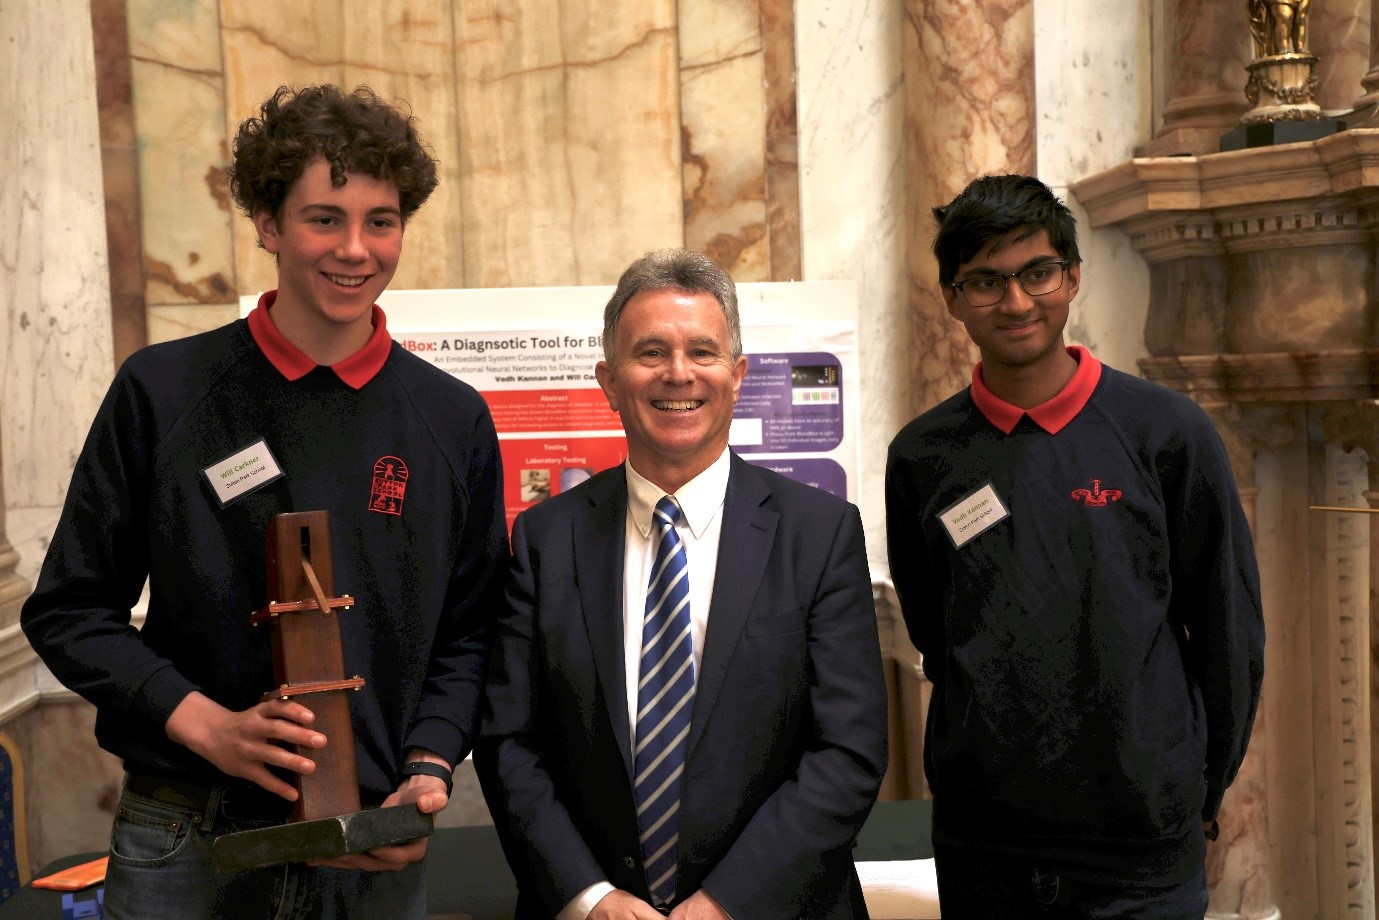 The winners of the 2023 Science for Development award Vedh Kannan and Will Carkner with Minister Fleming